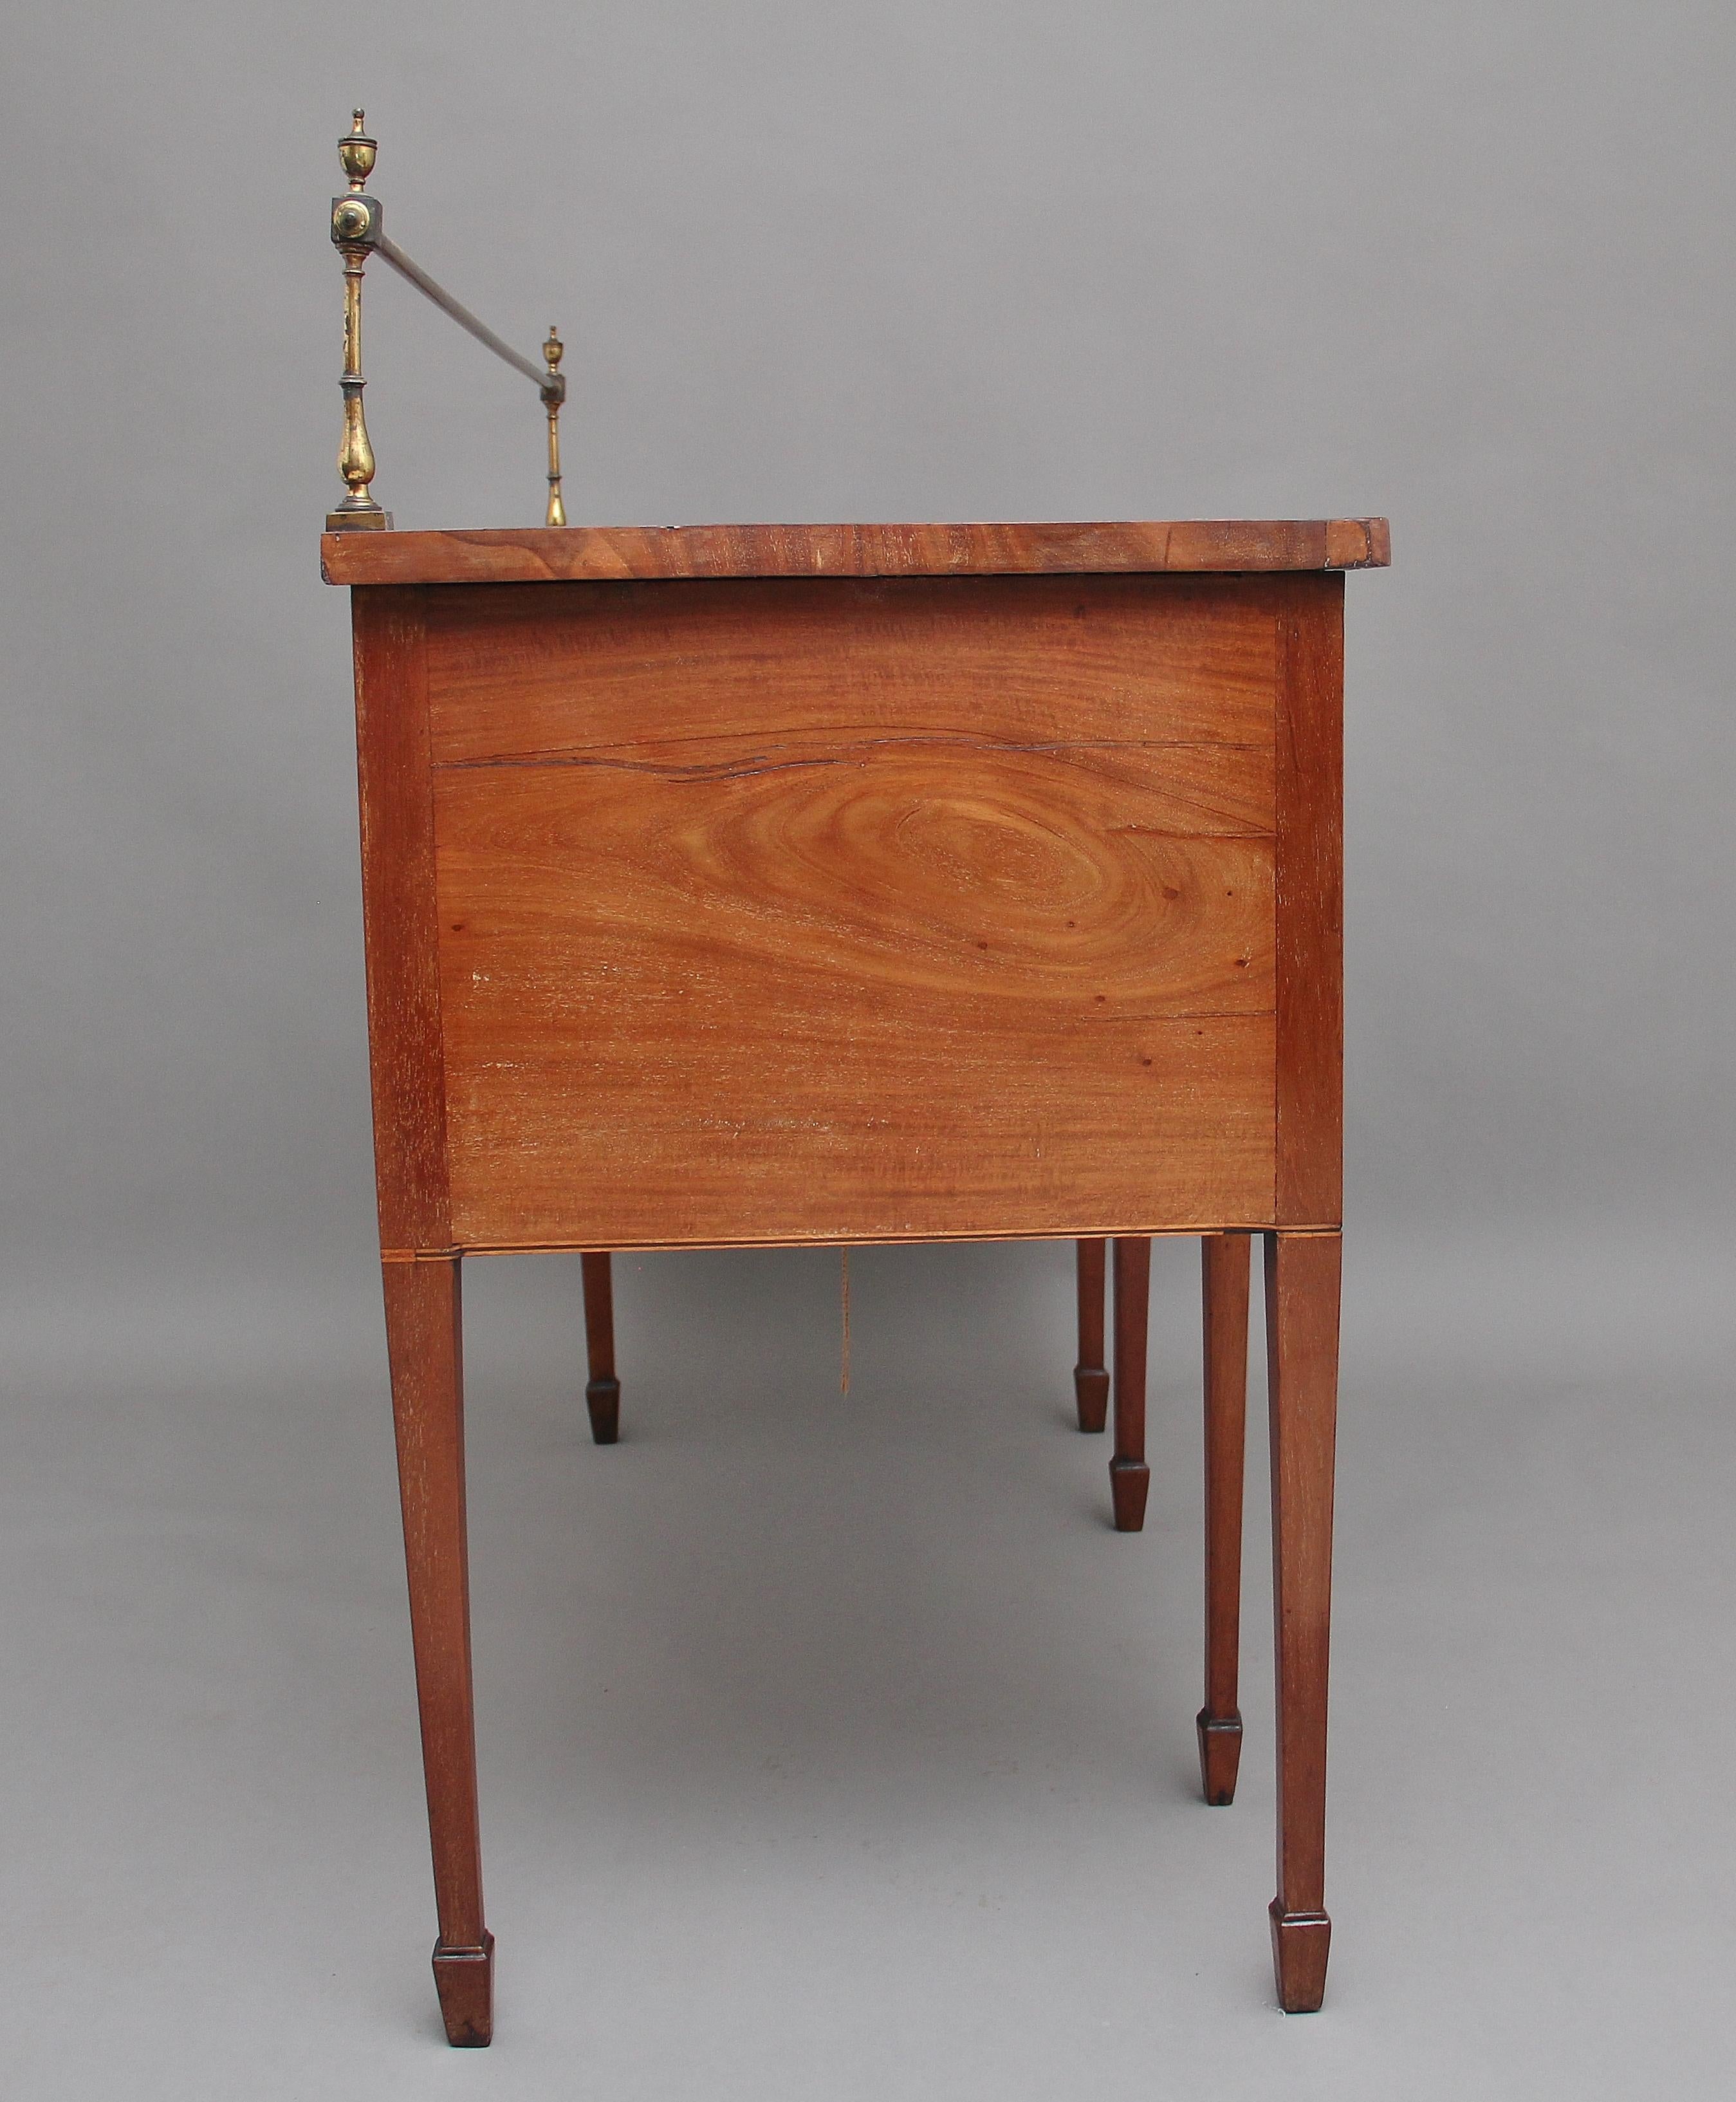 Georgian Early 19th Century Mahogany Inlaid Serpentine Sideboard For Sale